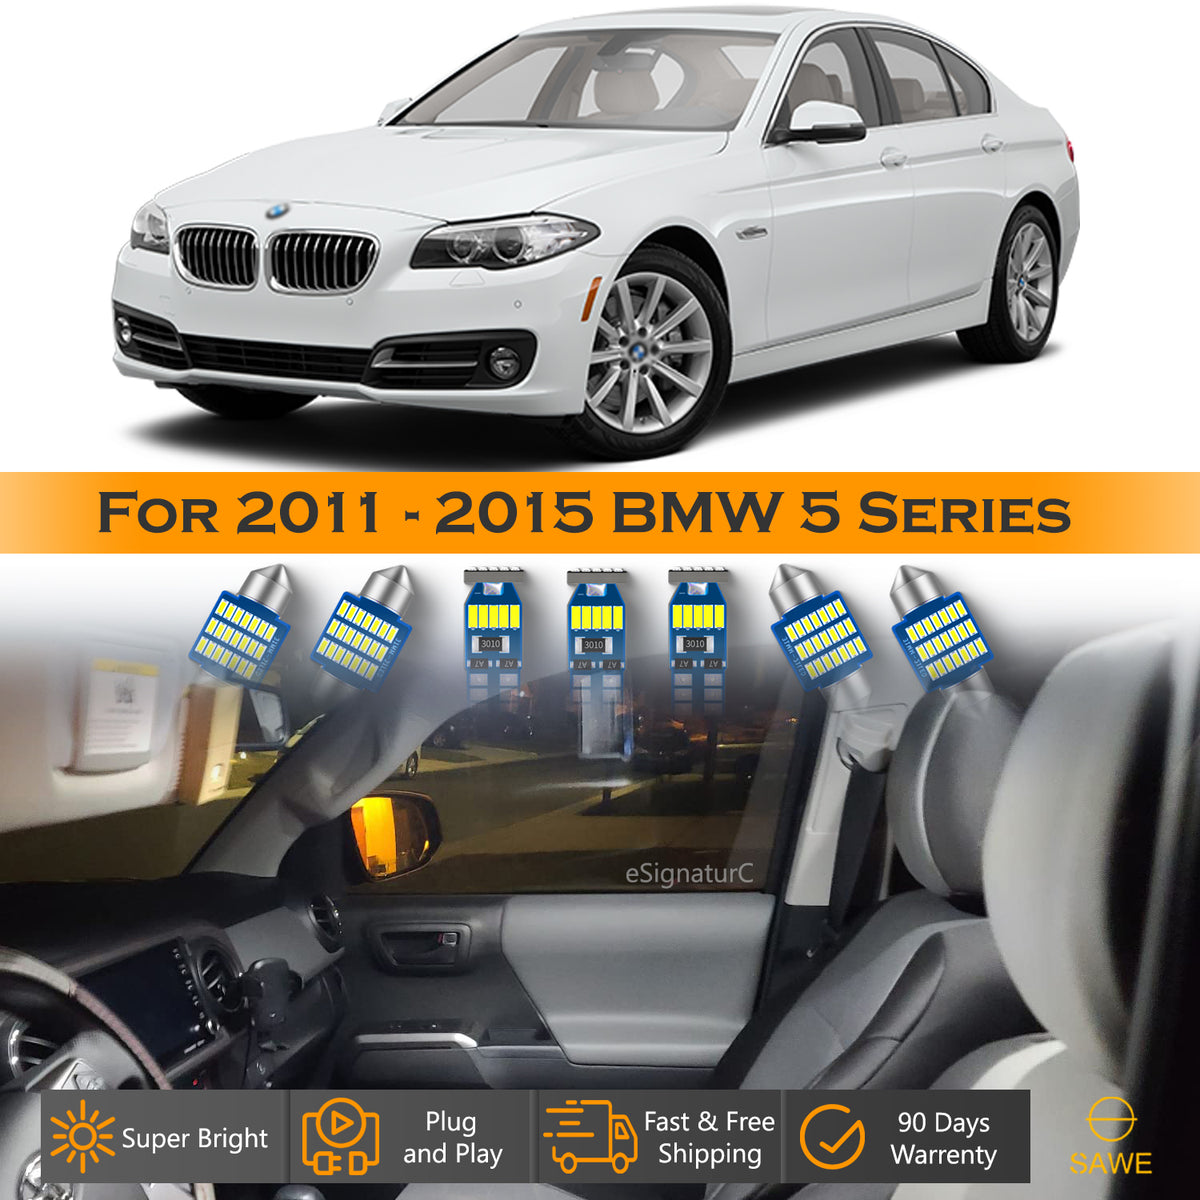 For BMW 535 550 F10 5 Series Interior LED Lights - Dome & Map Light Bulb Package Kit for 2011 - 2015 - White